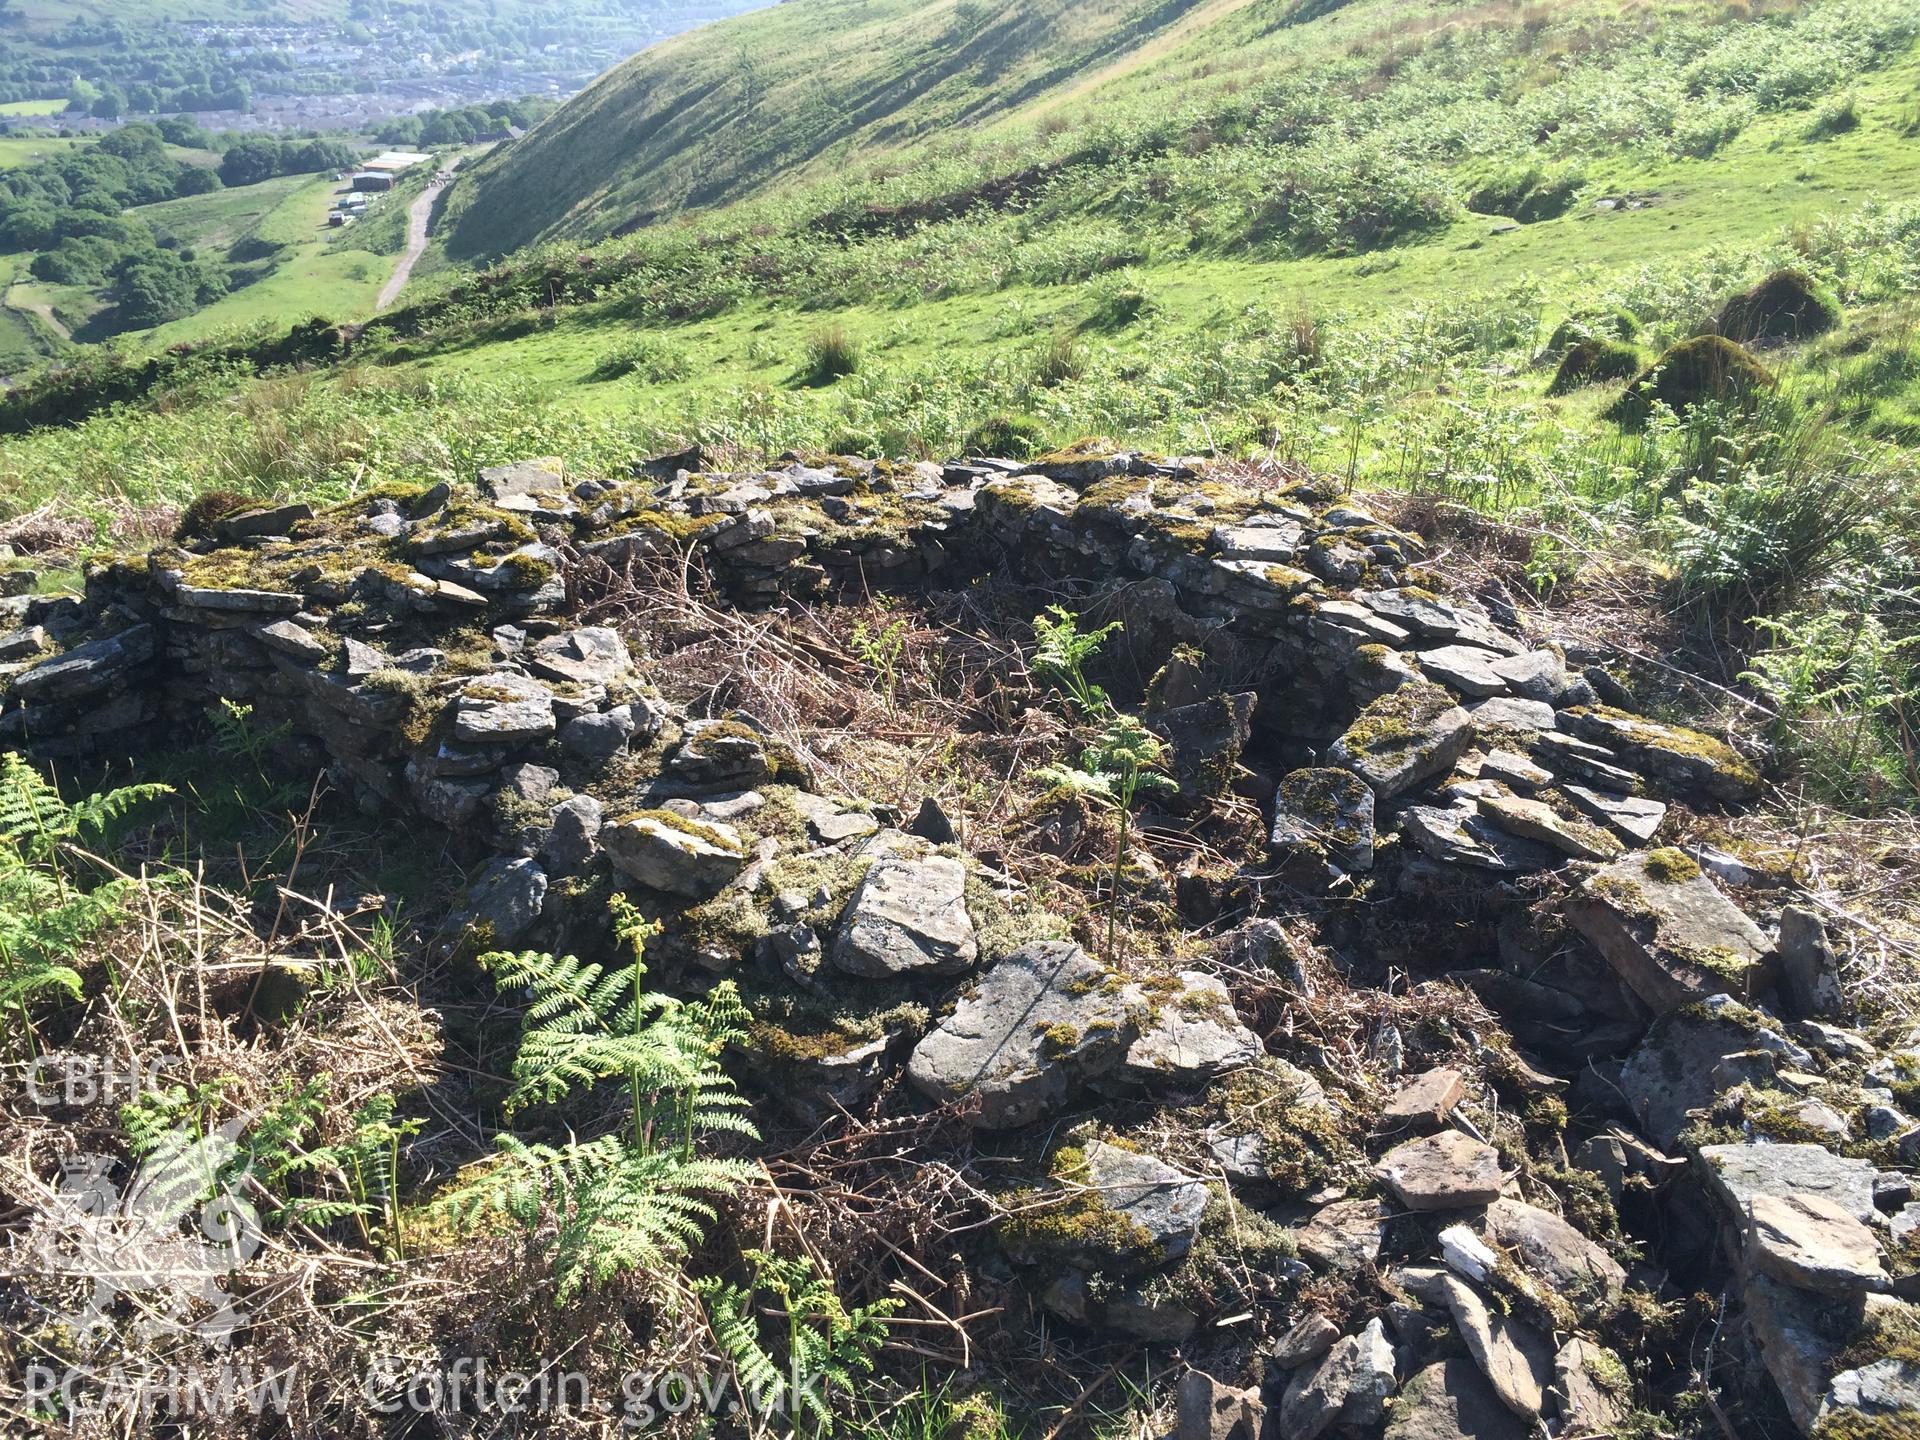 Colour photo showing Tarren Bwllfa (site L), associated with a report on early Rhondda houses, compiled by Paul R. Davis, c.2016.